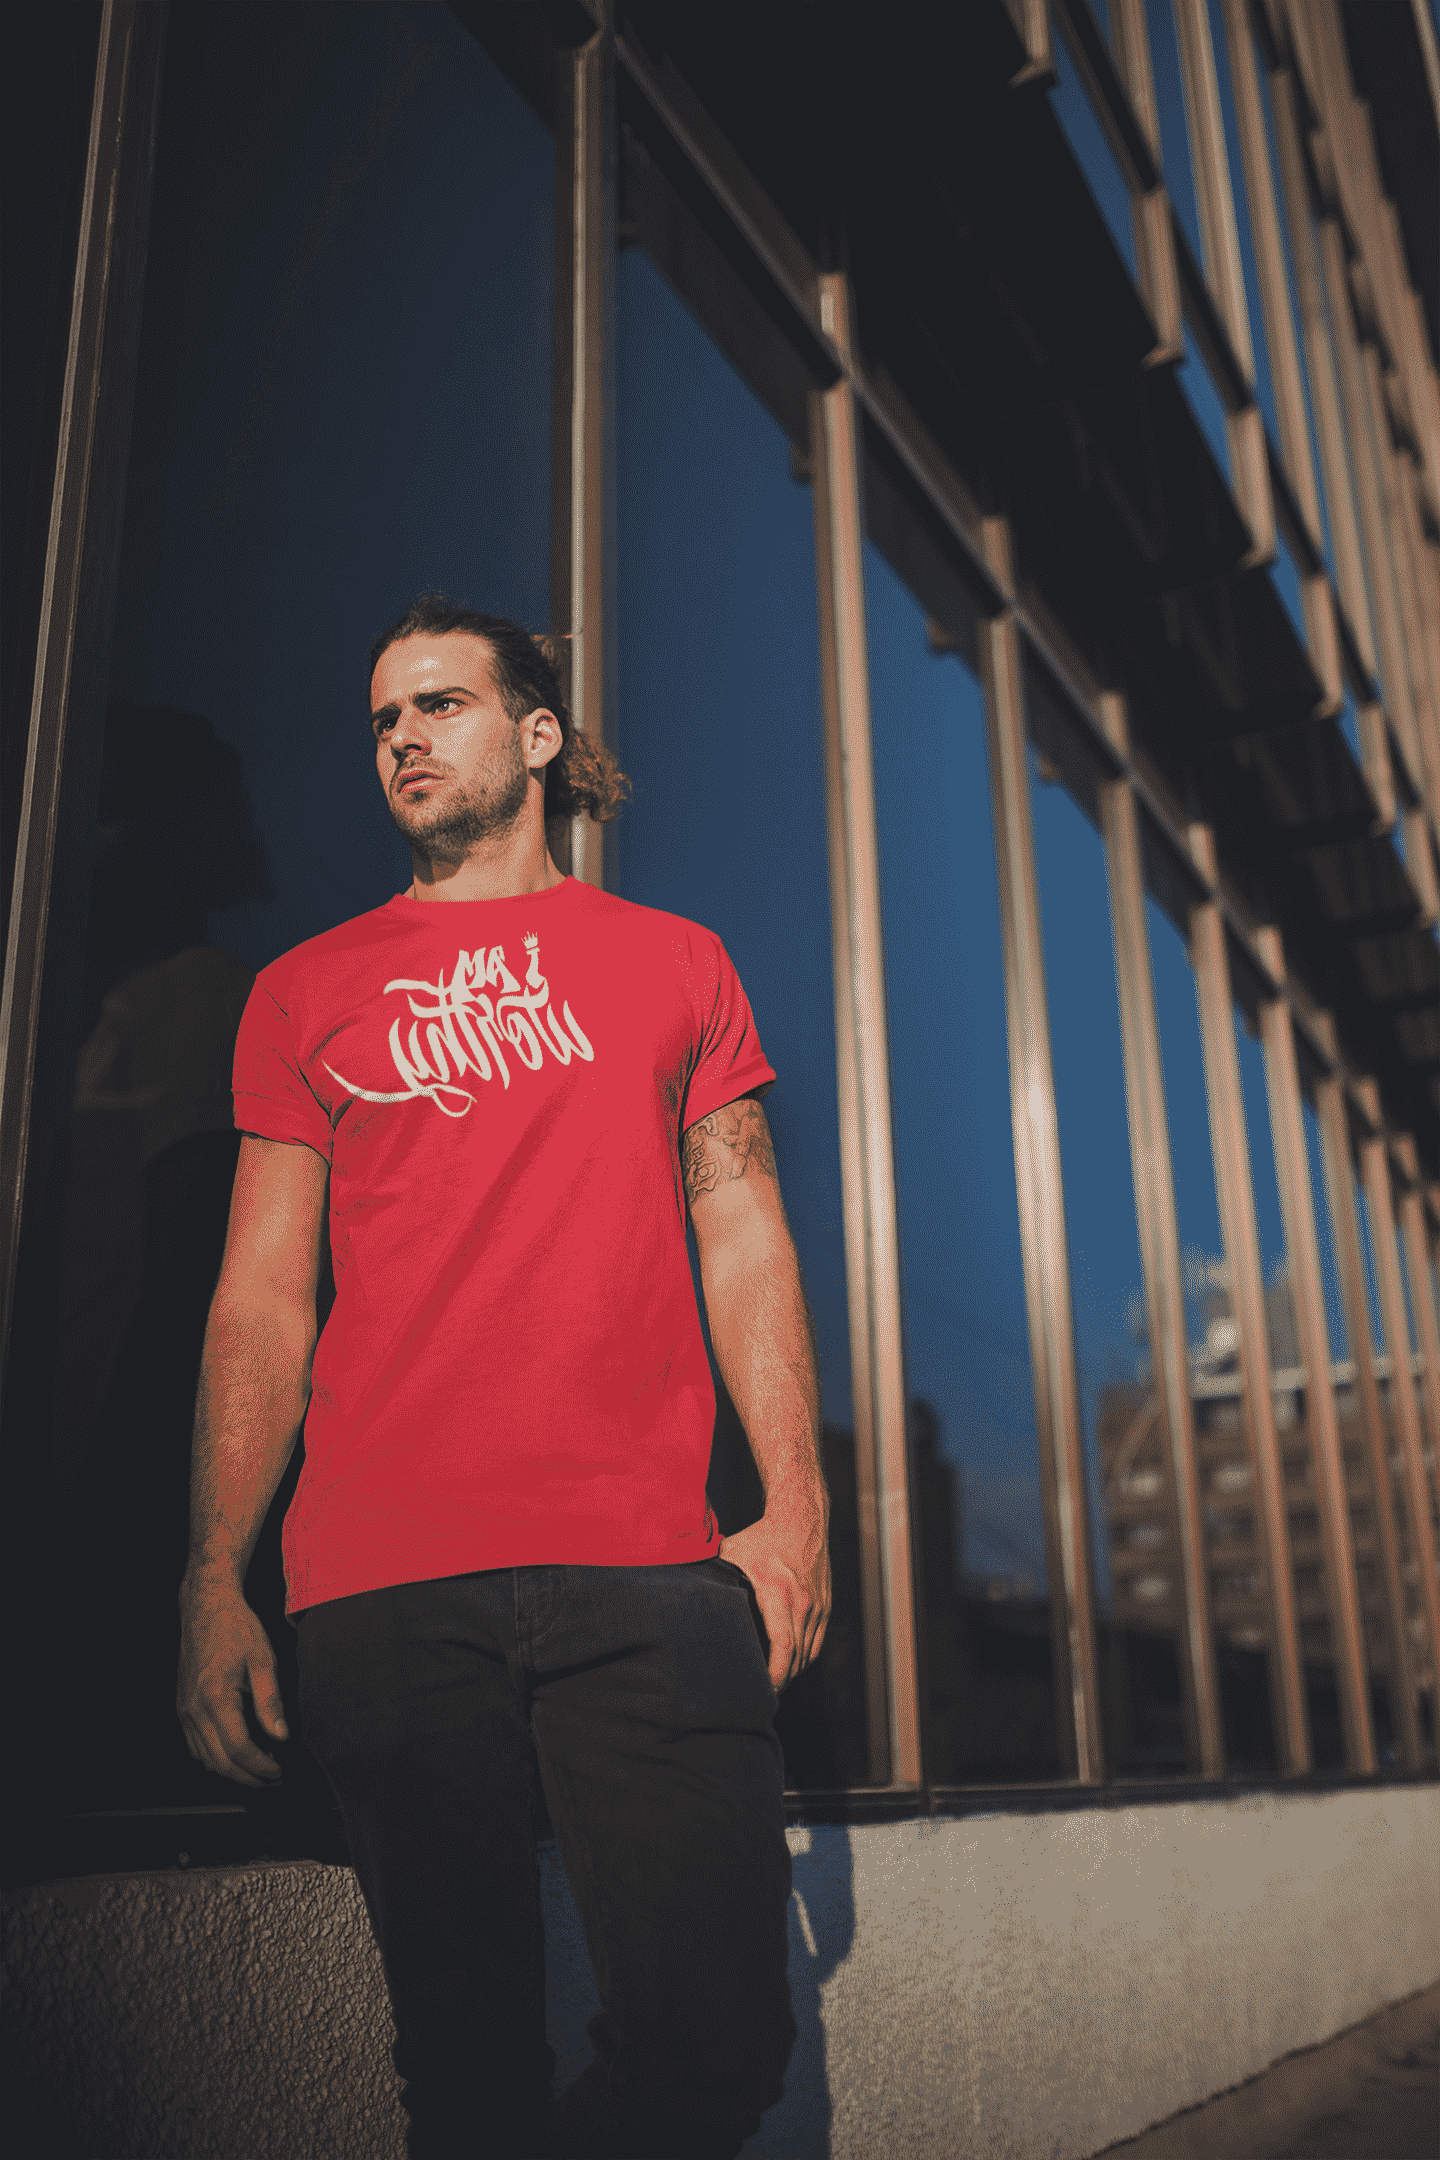 mockup-of-a-man-wearing-a-sublimated-tshirt-against-a-building-s-mirrors-a19939-min